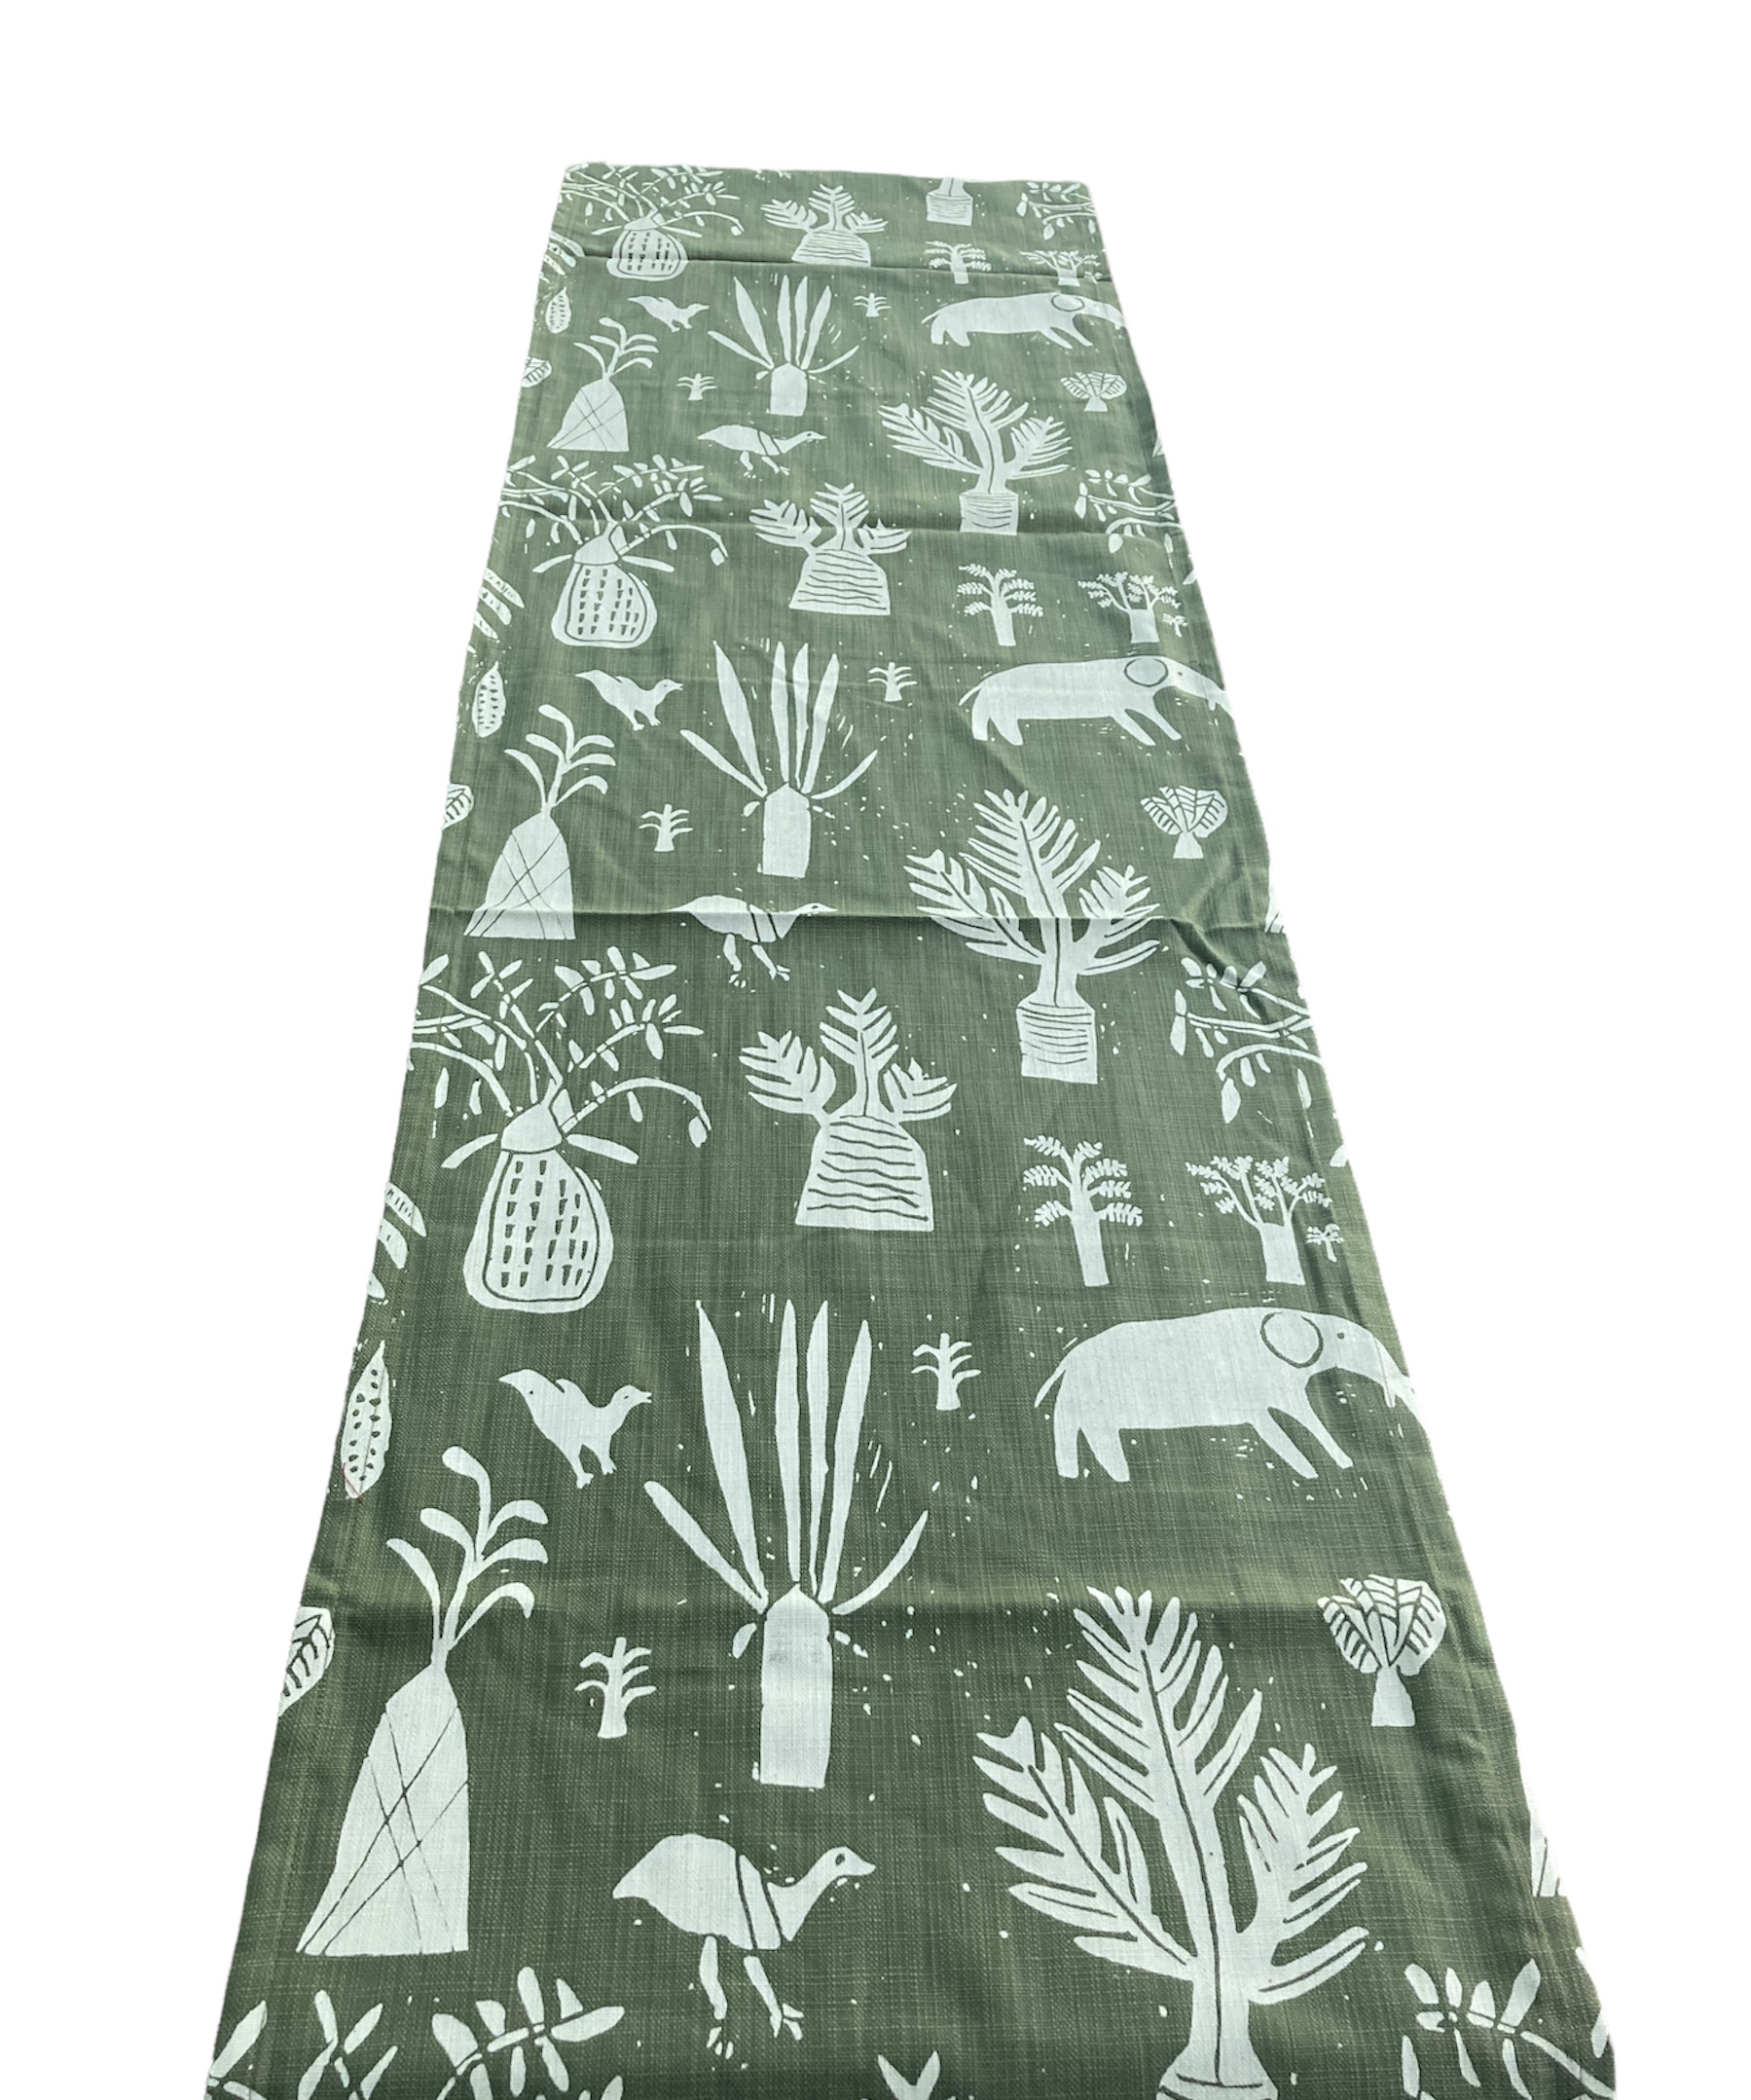 100% cotton Table Runner 96" x 16" from Namibia - Design 10l